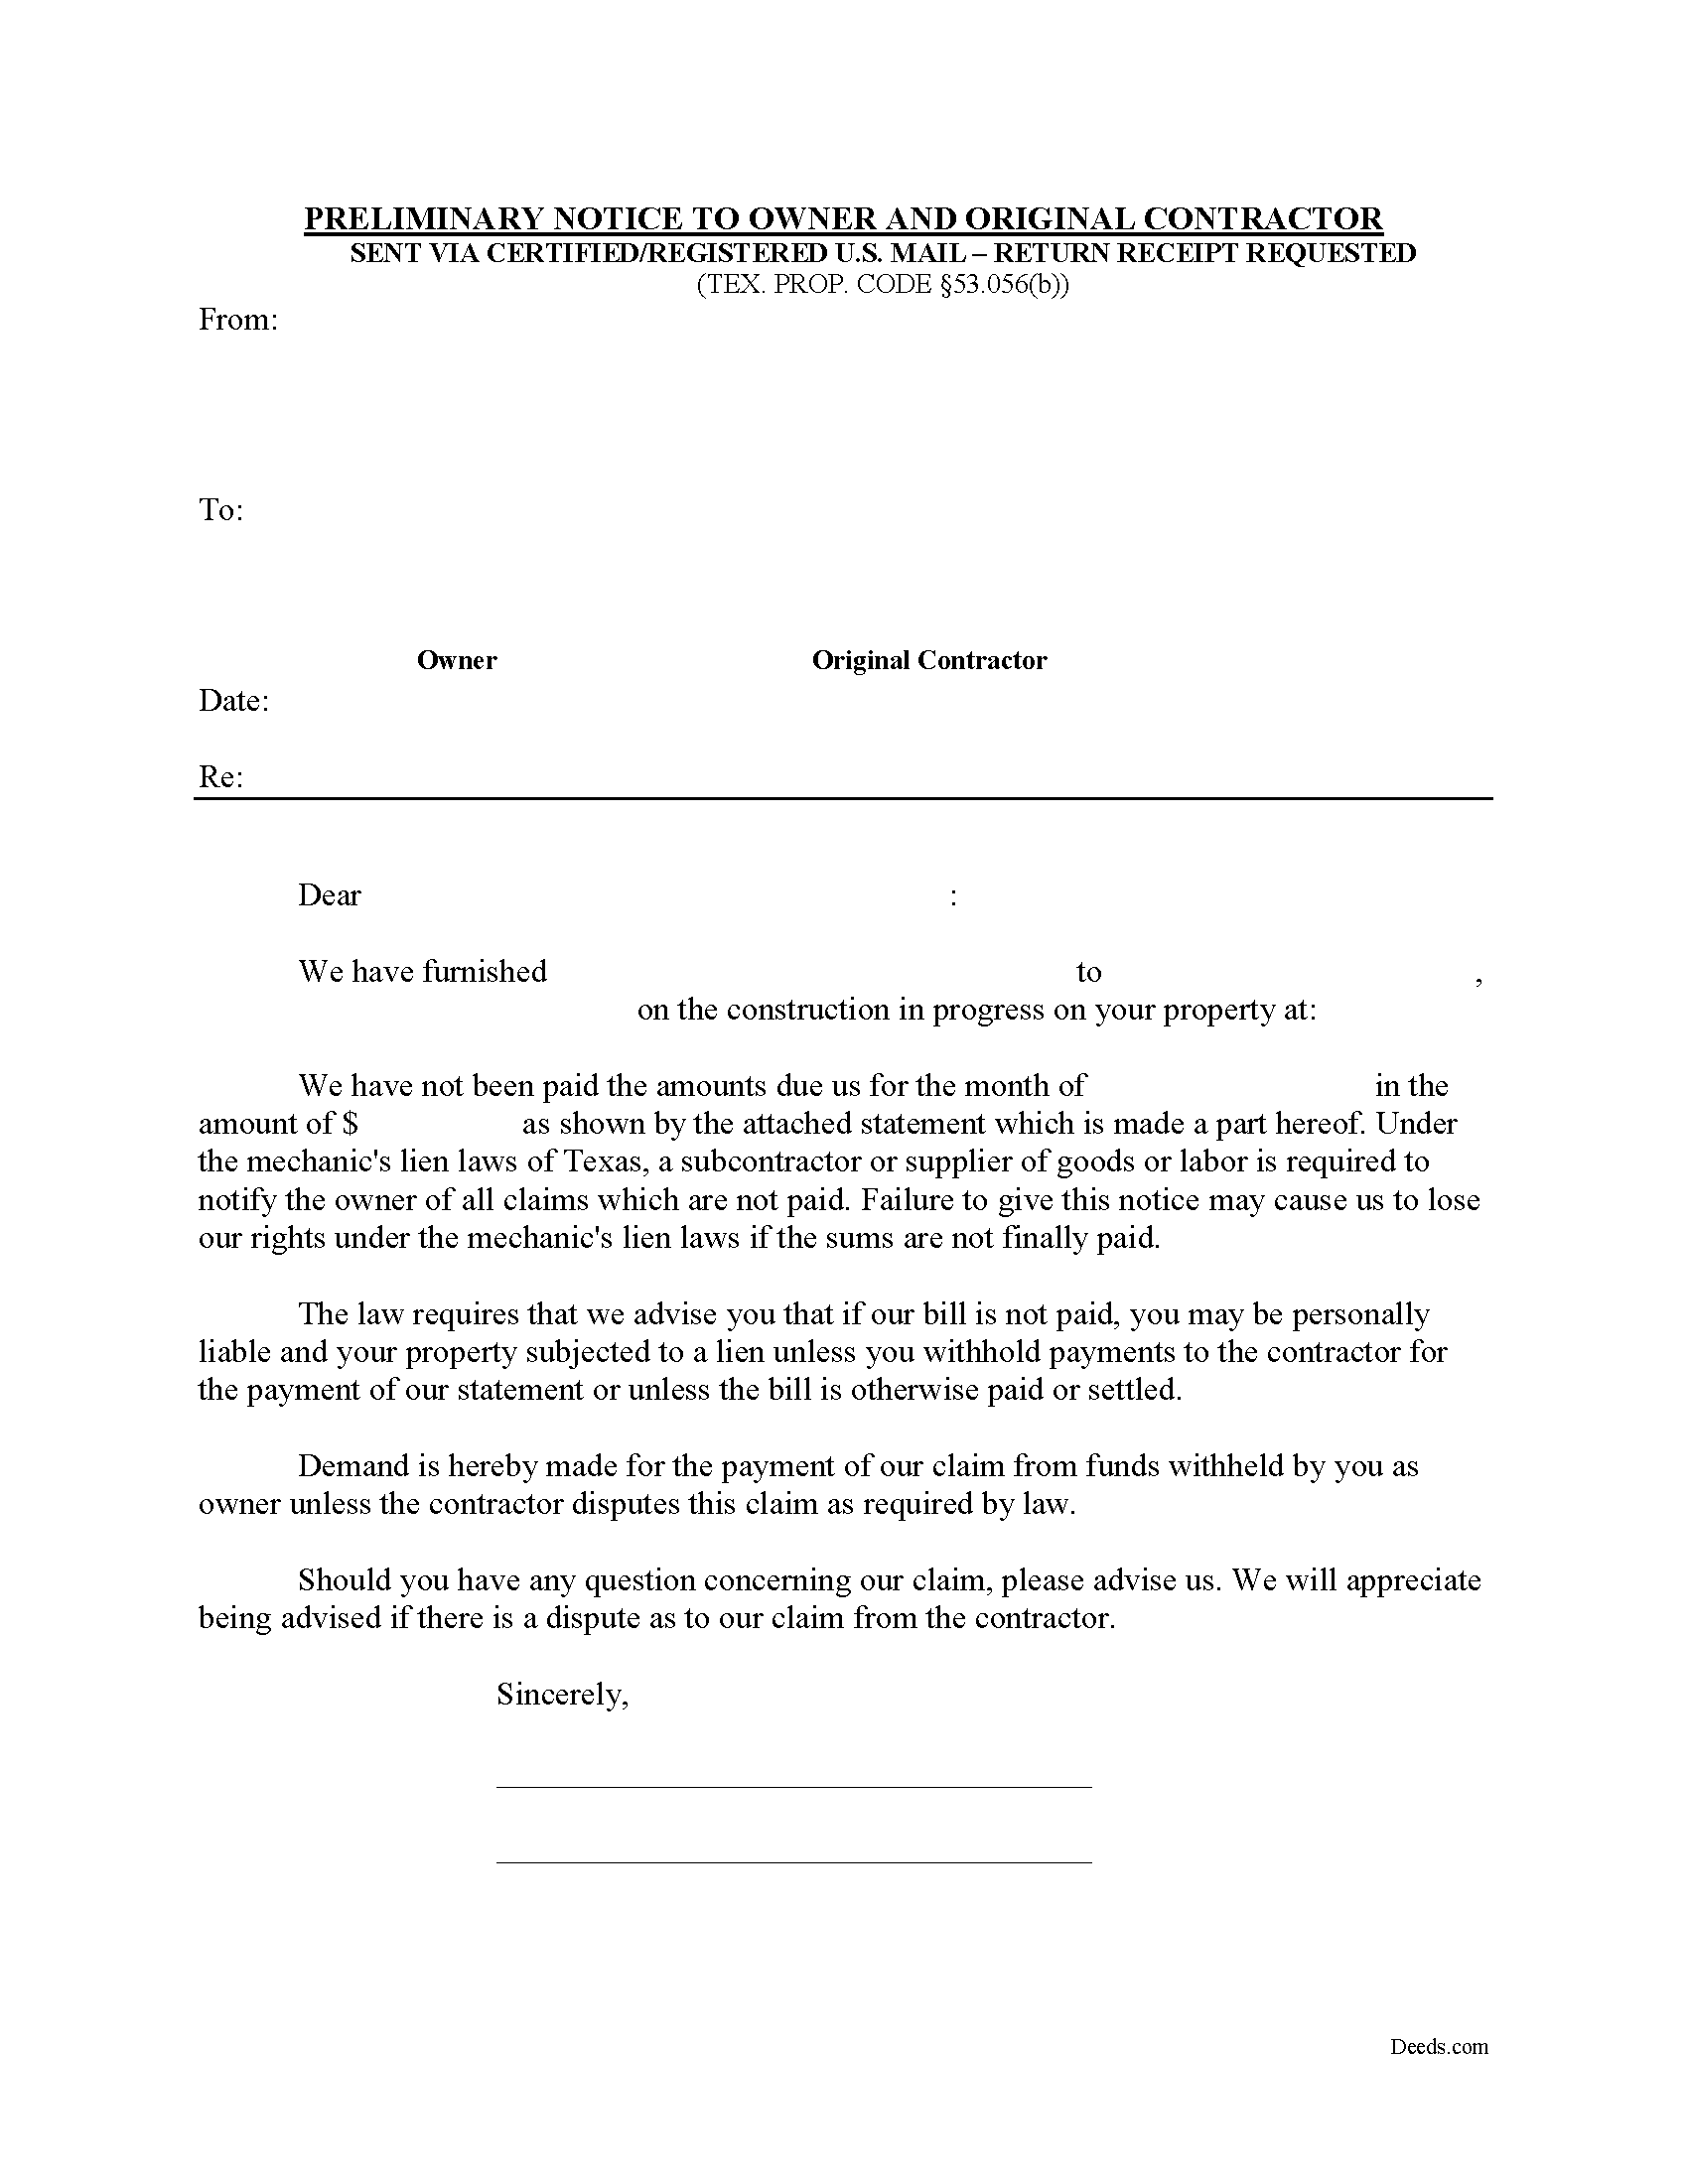 Preliminary Notice to Owner and Original Contractor